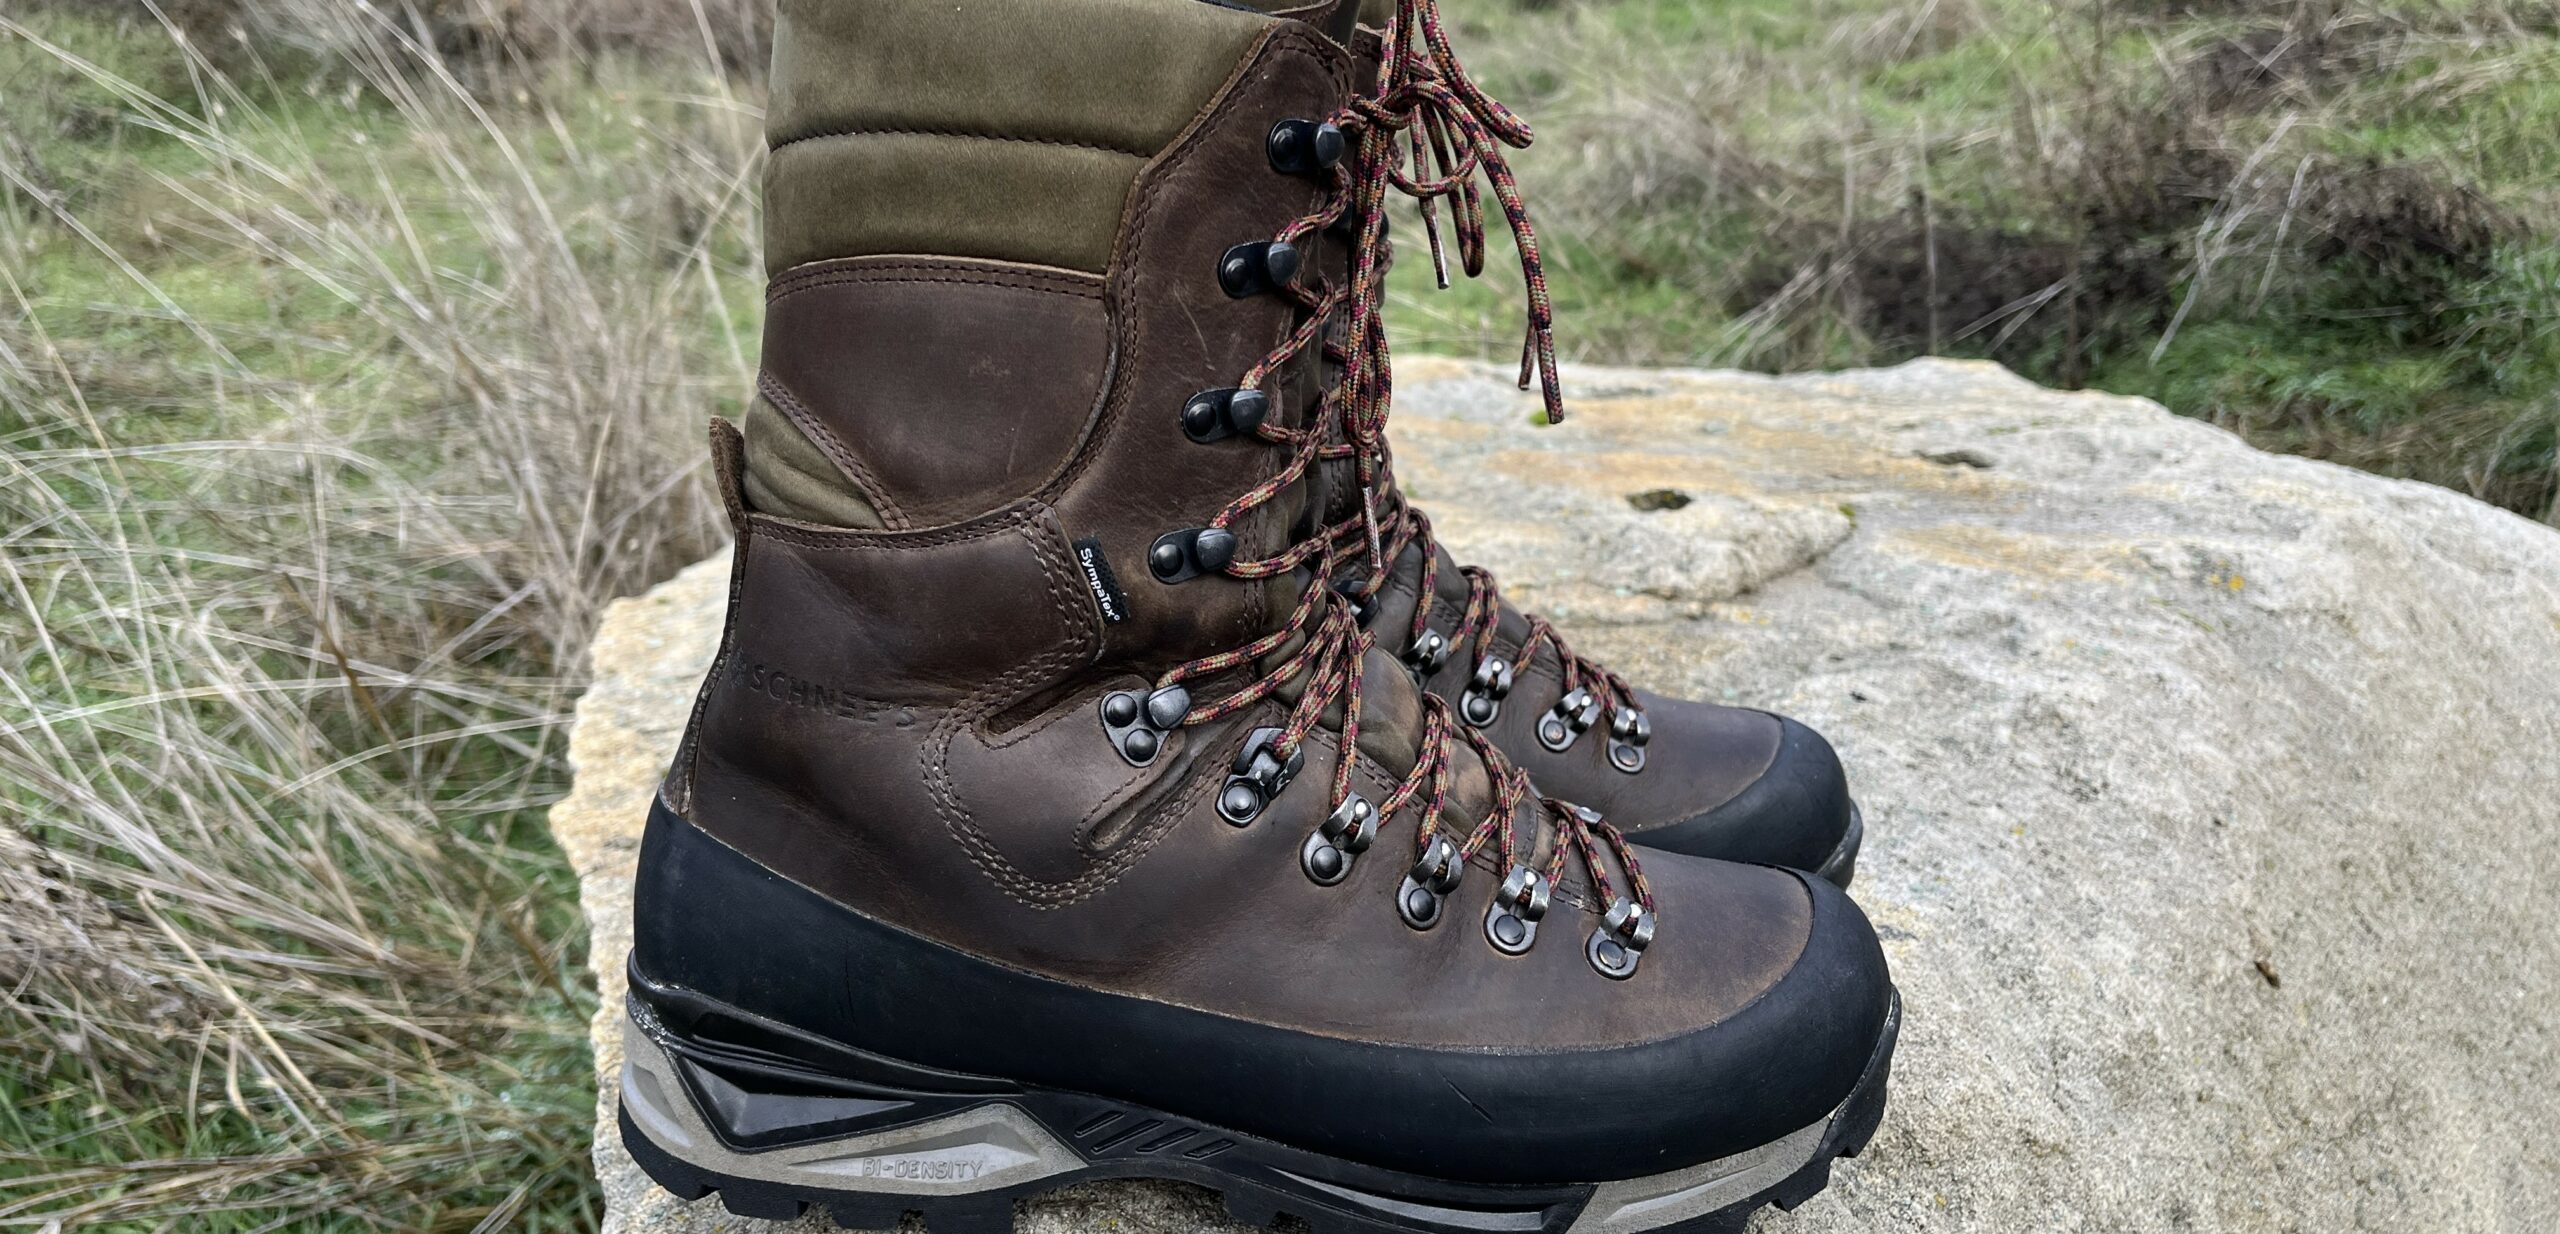 Schnee Boots Review | Best Leather Hunting Boots? – Schnee Granite 600g Cold Weather Boots